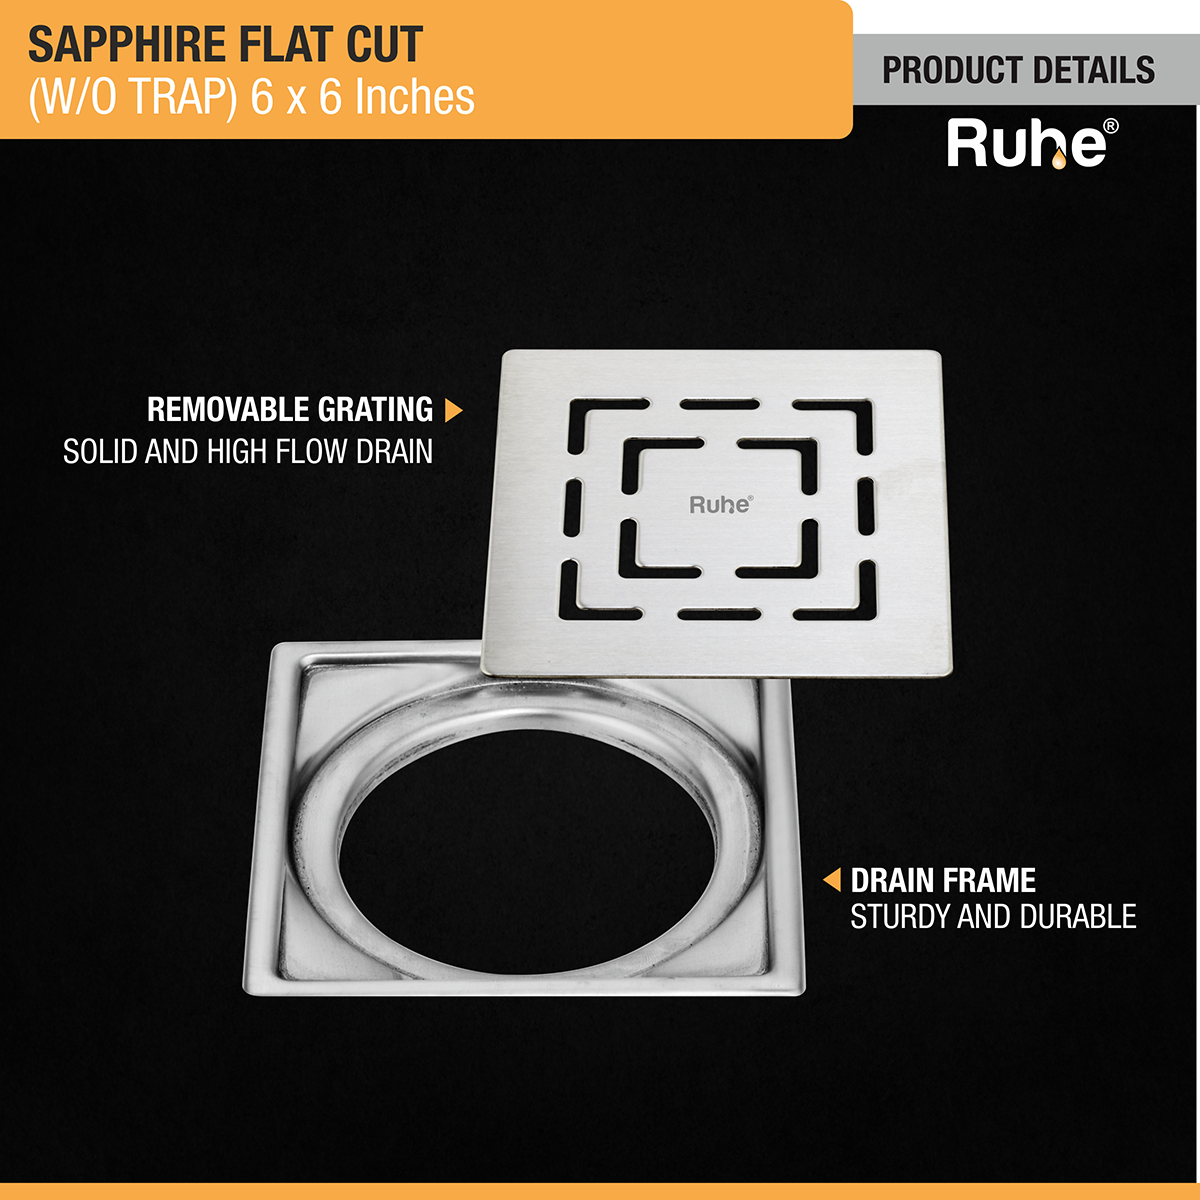 Sapphire Square Flat Cut 304-Grade Floor Drain (6 x 6 Inches) with removable grating and drain frame